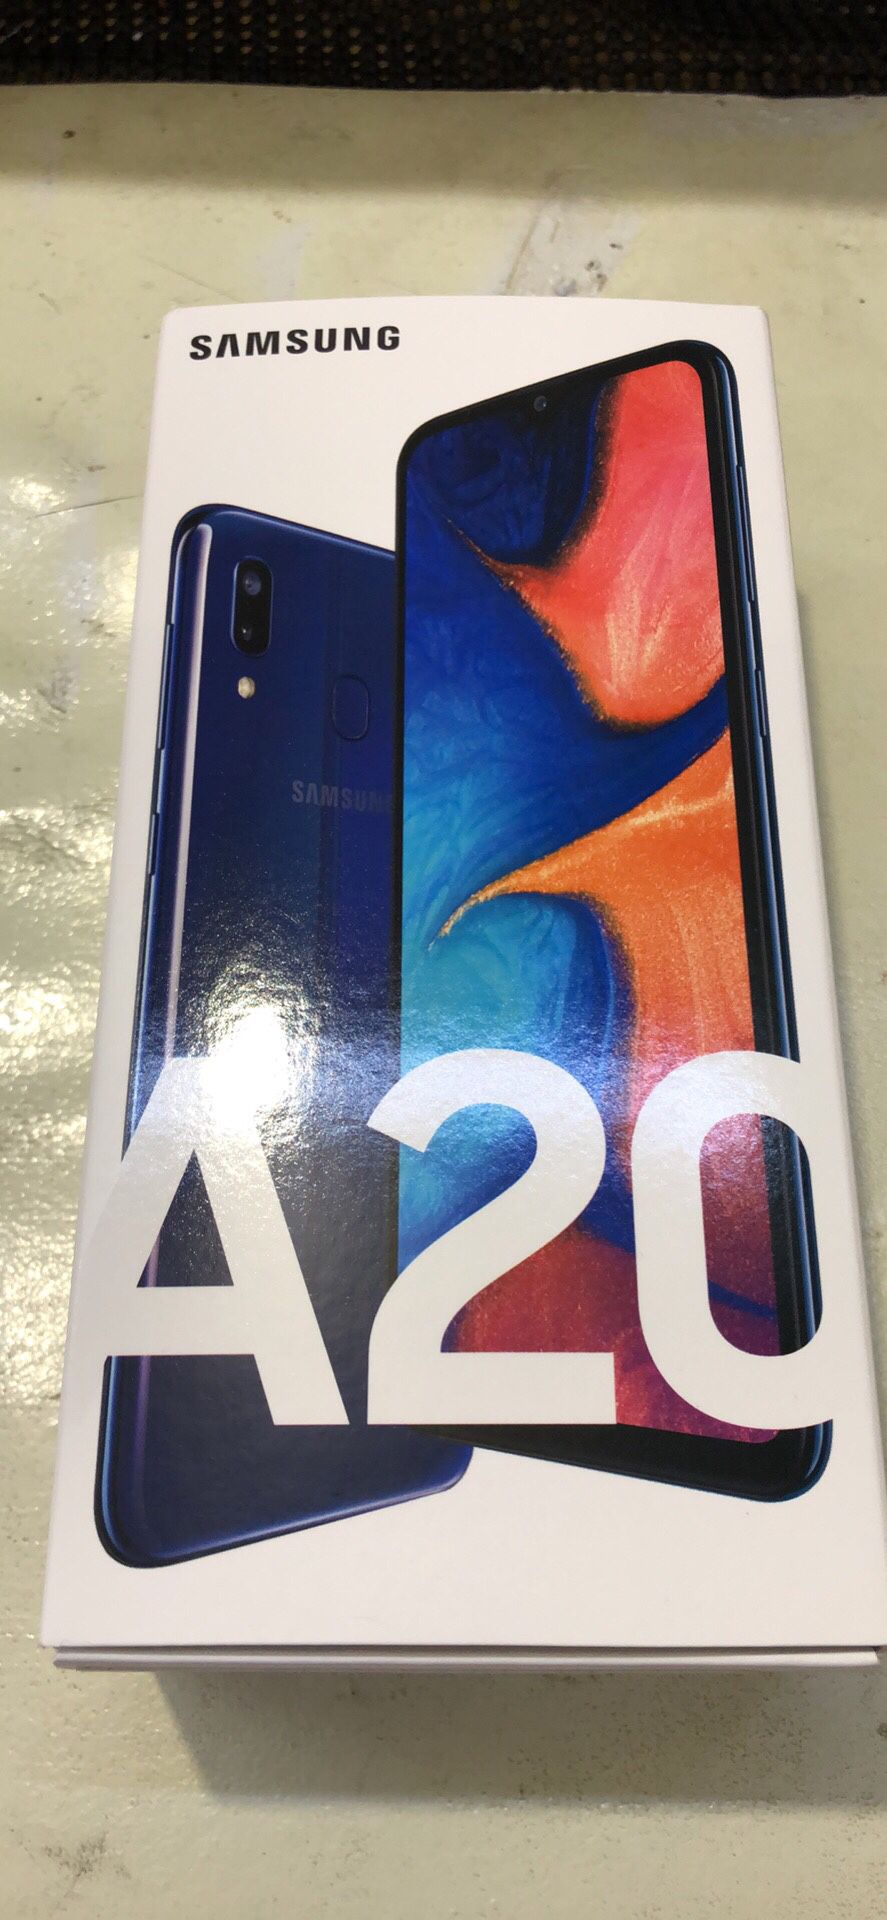 Samsung Galaxy A20 Latest Phone just released in March 2019